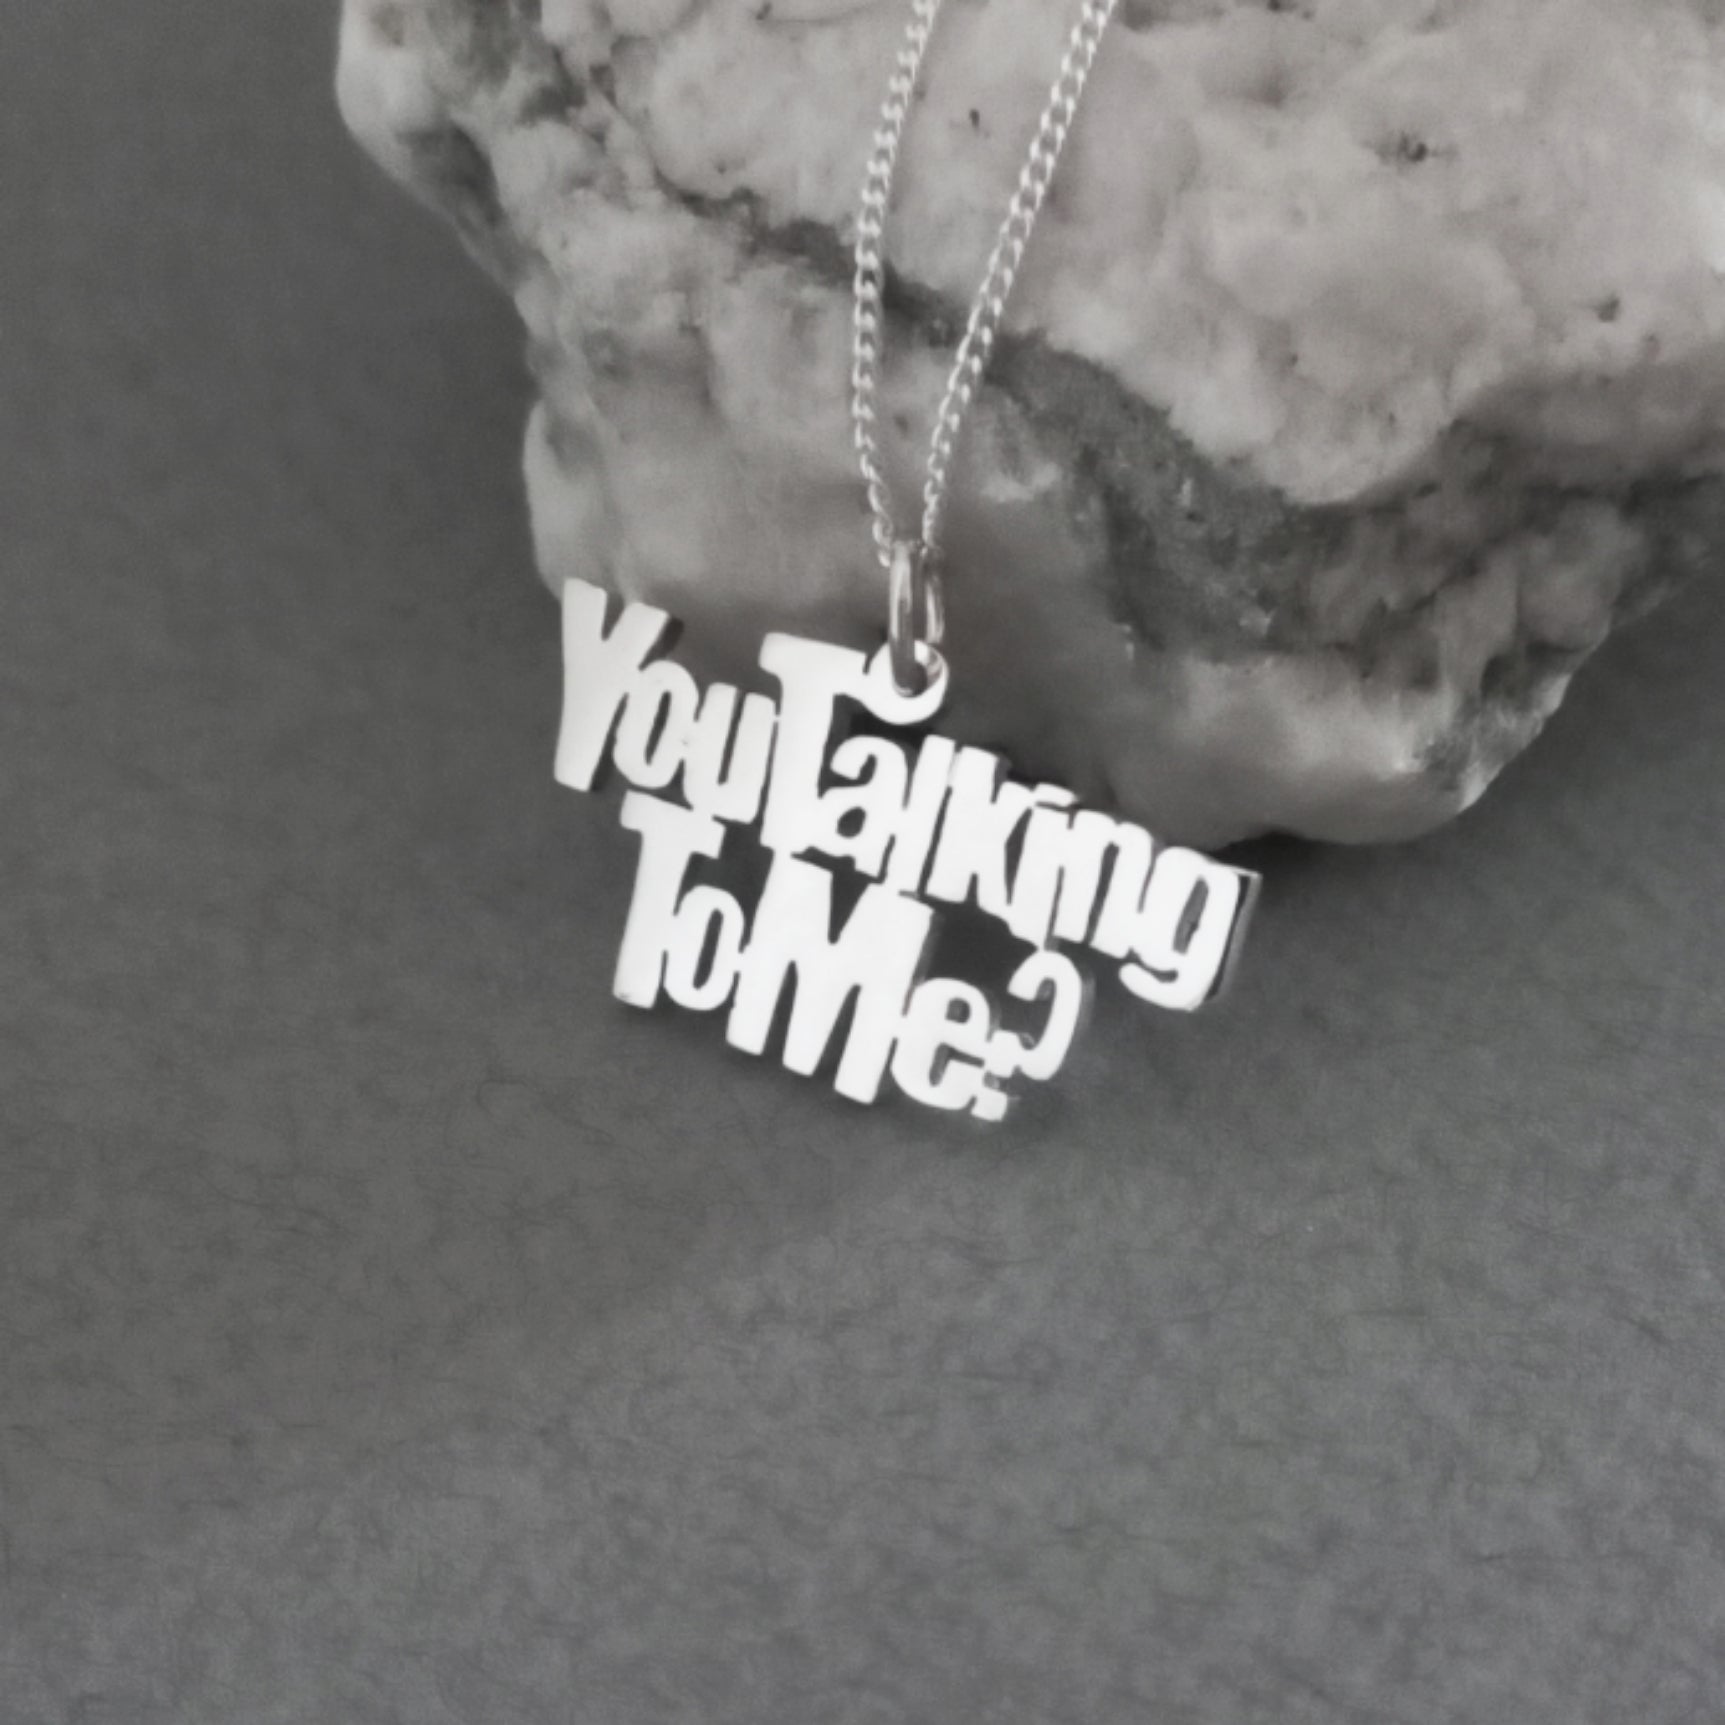 You Talking to Me? Sterling Silver Handmade Pendant